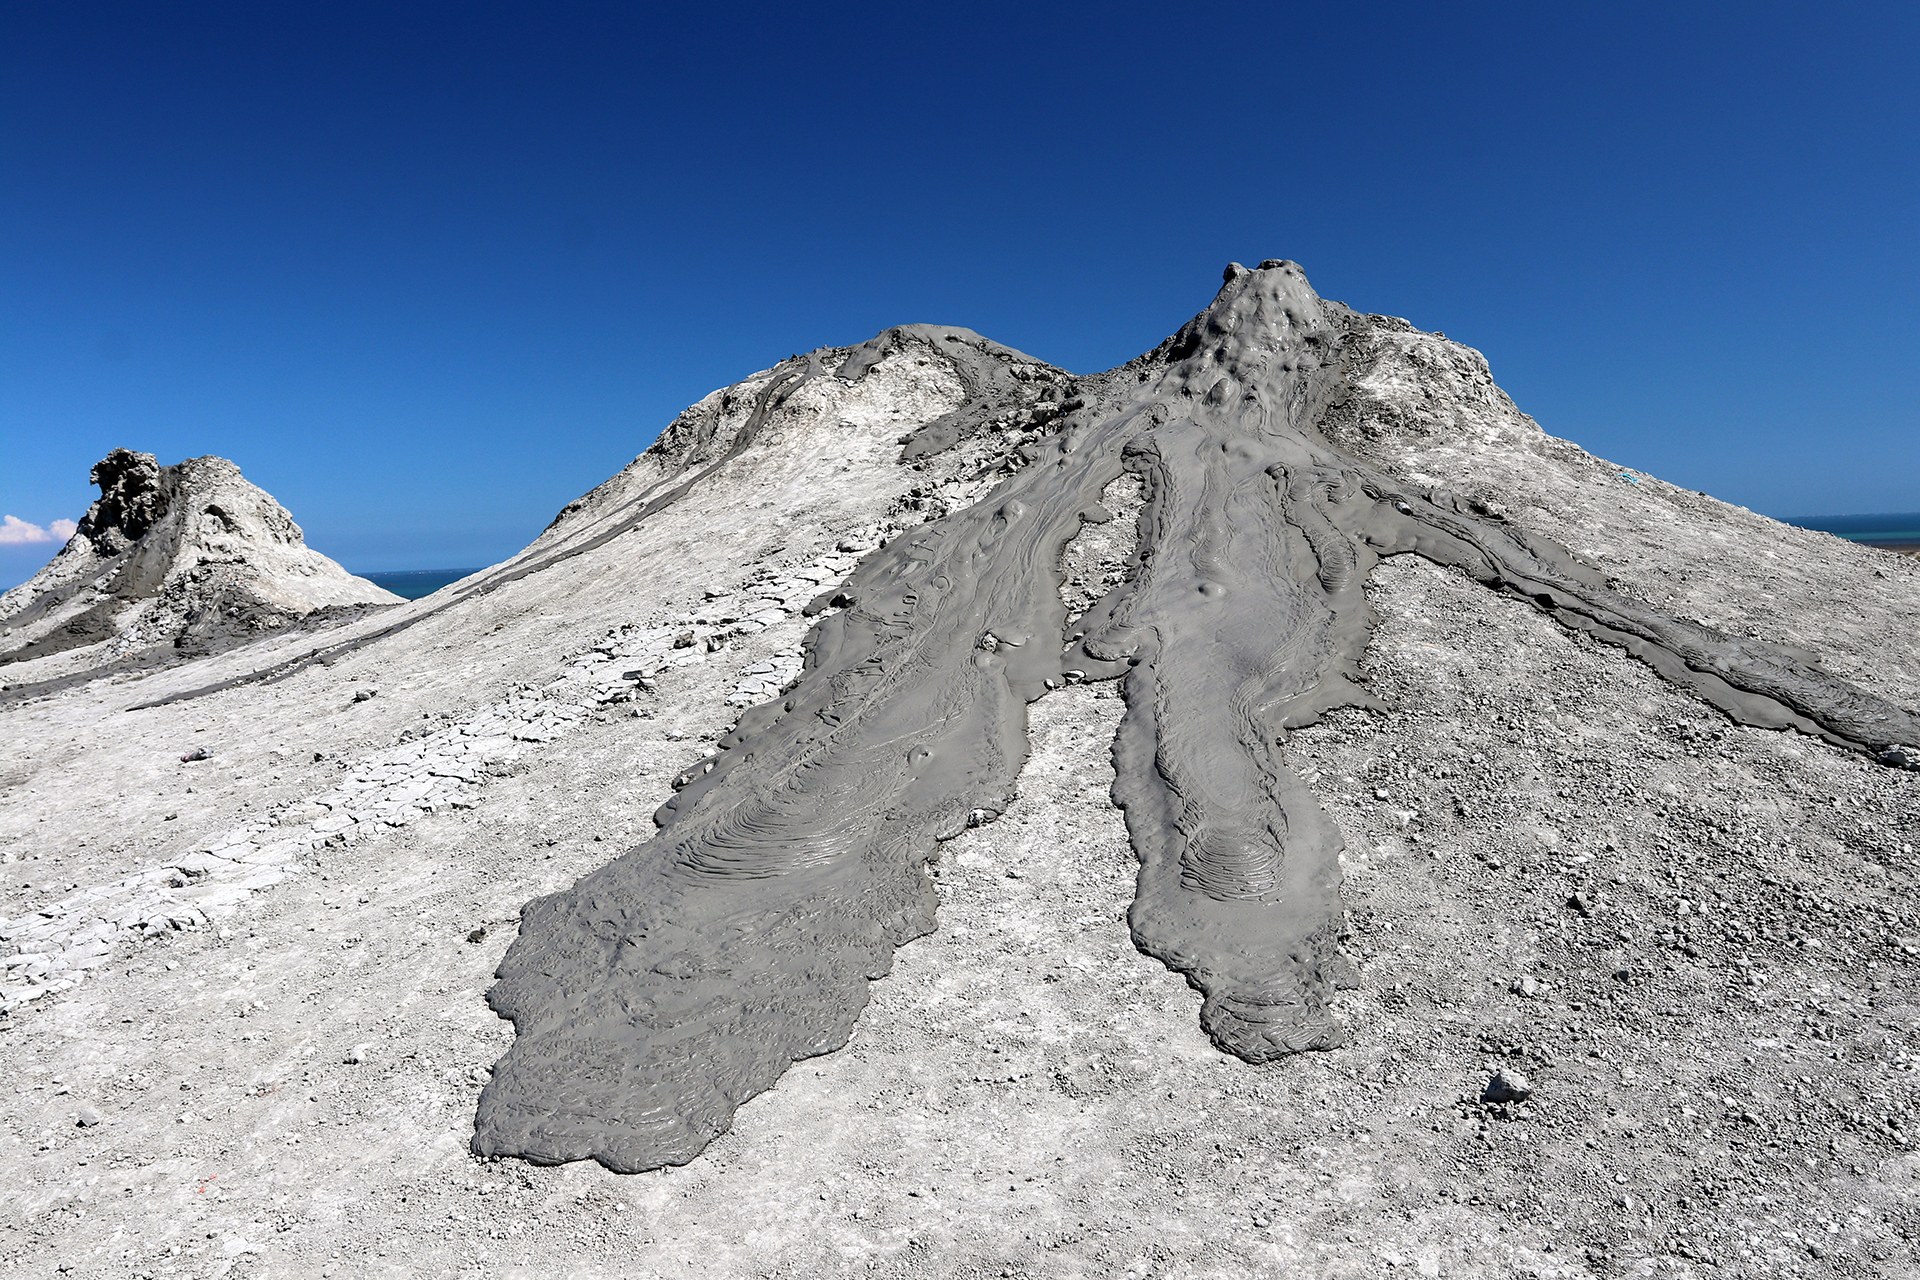 Active mud volcanoes on Earth